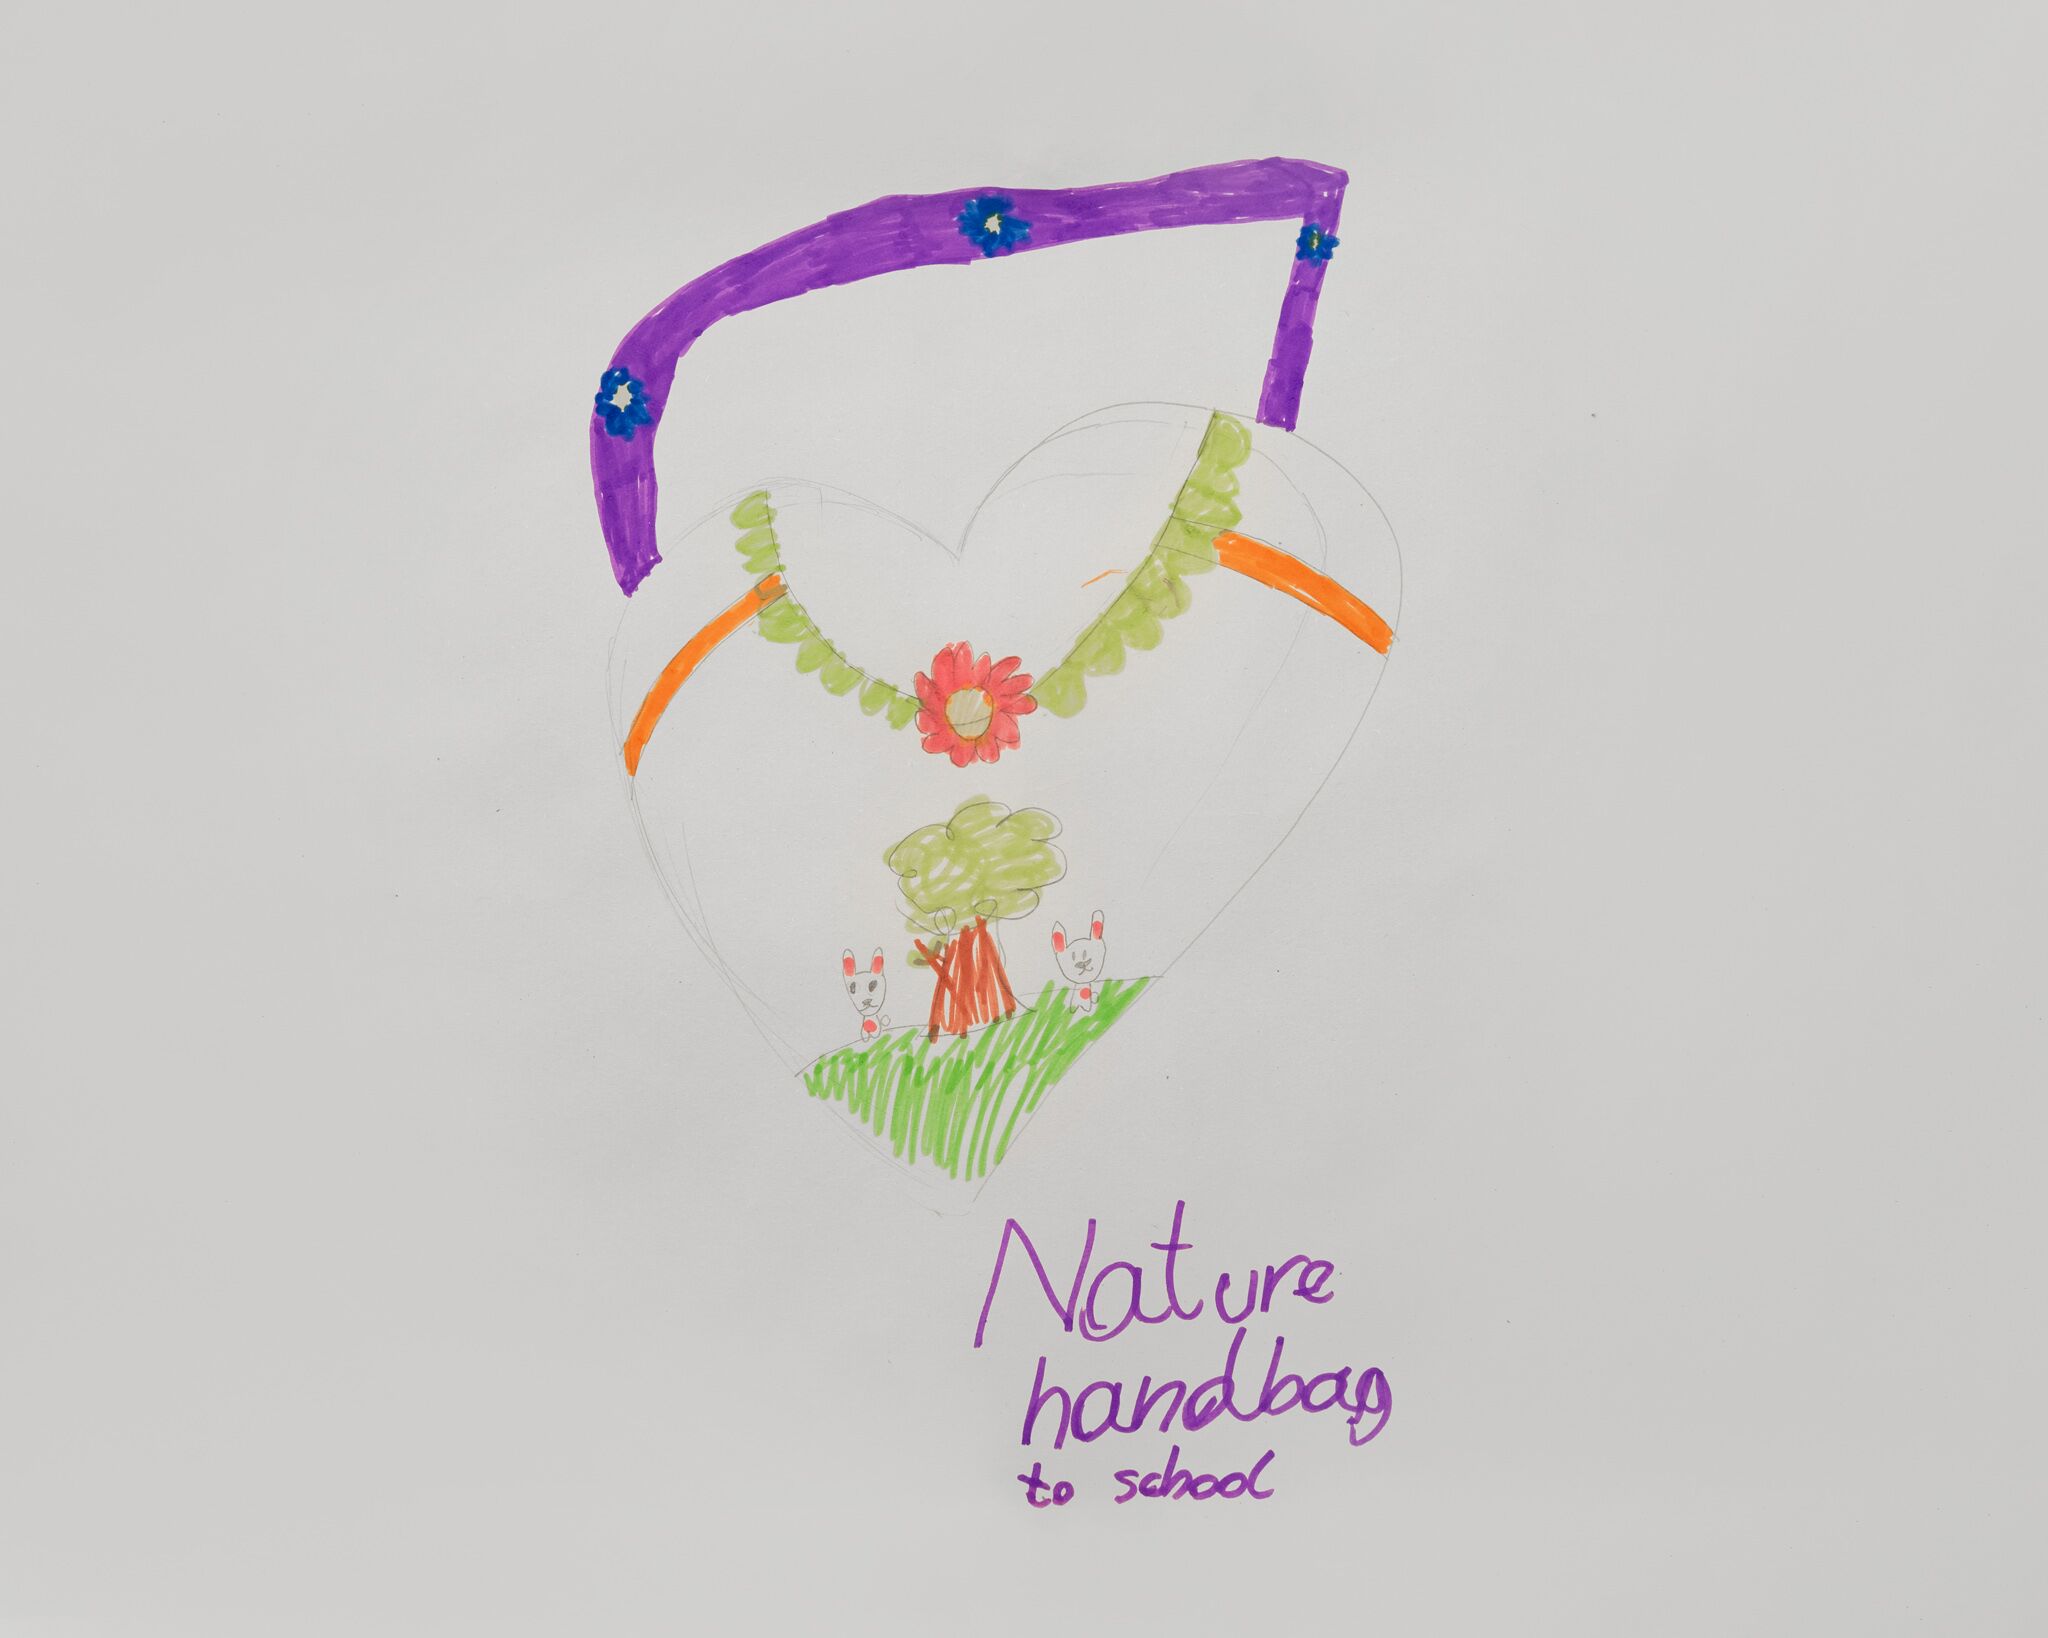 2.13 Inspired By Nature Bag Includes Seeds To Grow Wildflowers And Attract Bees